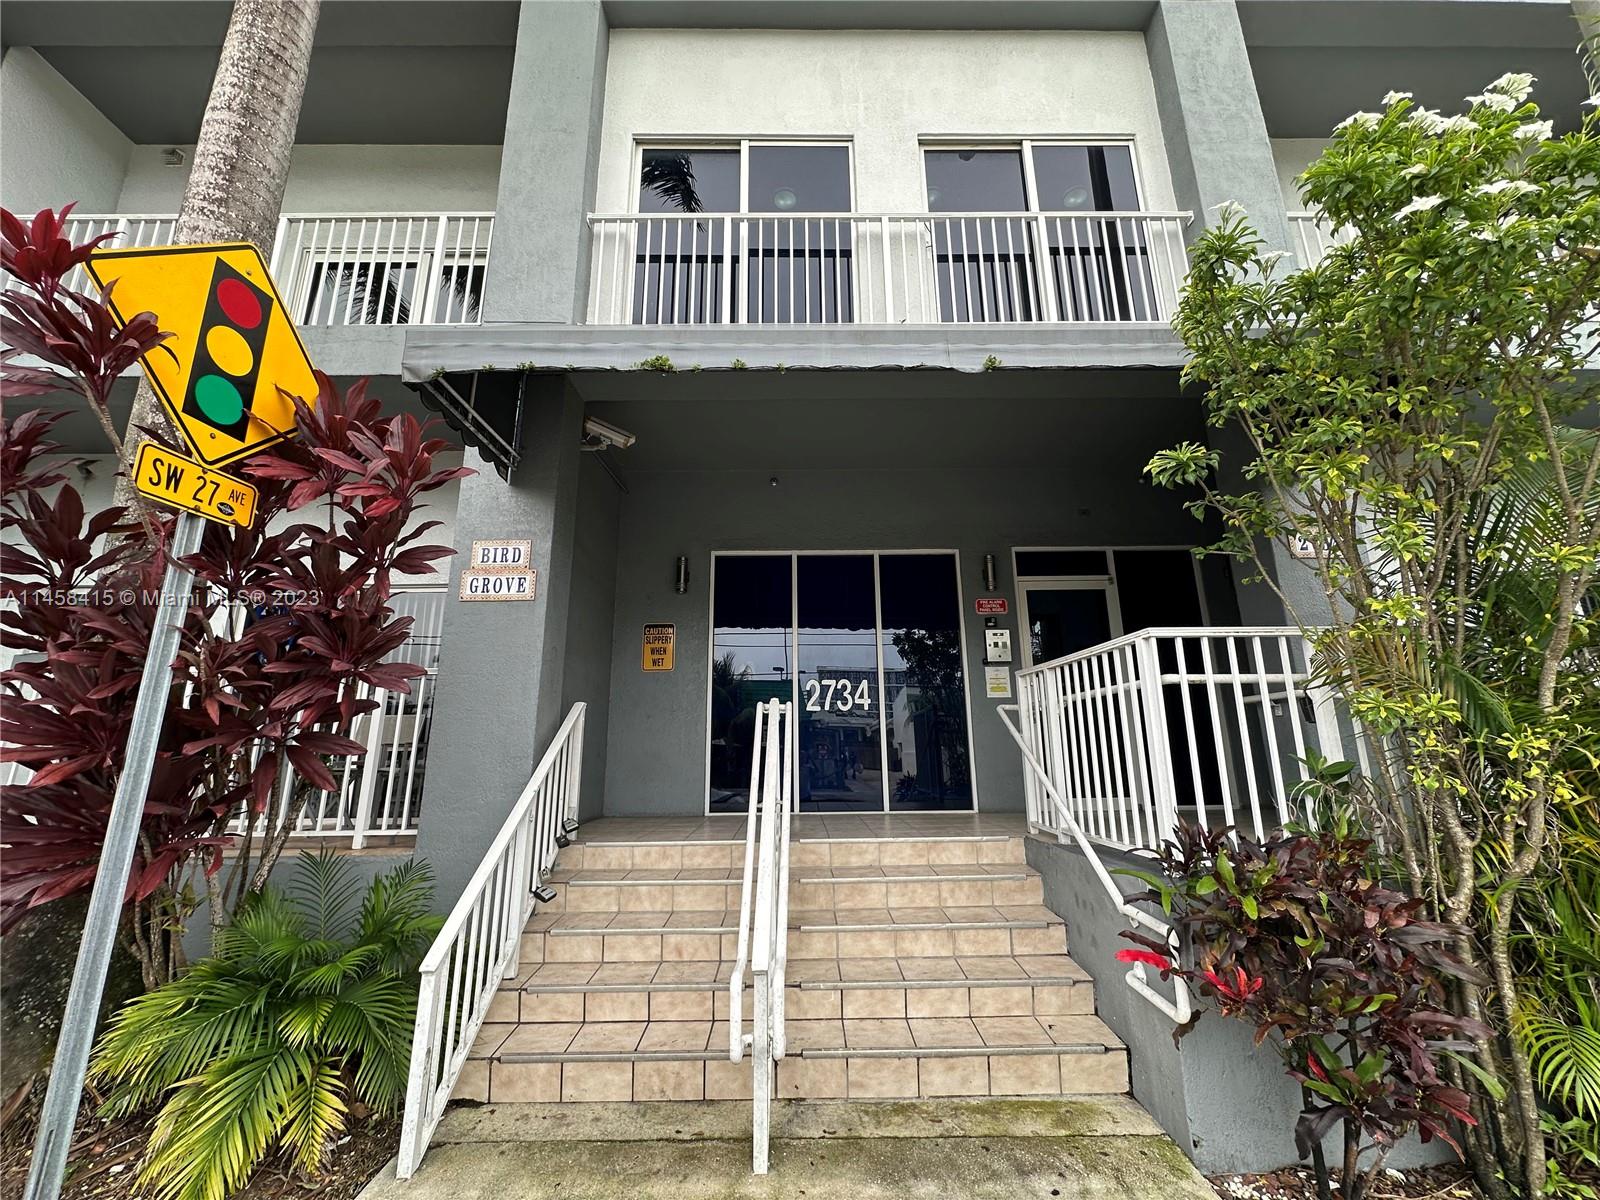 Nice upgrade unit 1 bed/1 bath in Coconut Grove location, gated community walking distance to shops and restaurants. 1 assigned parking space and washer and dryer inside the units. Don't miss this opportunity!! Granite counter top - washer & dryer in unit.